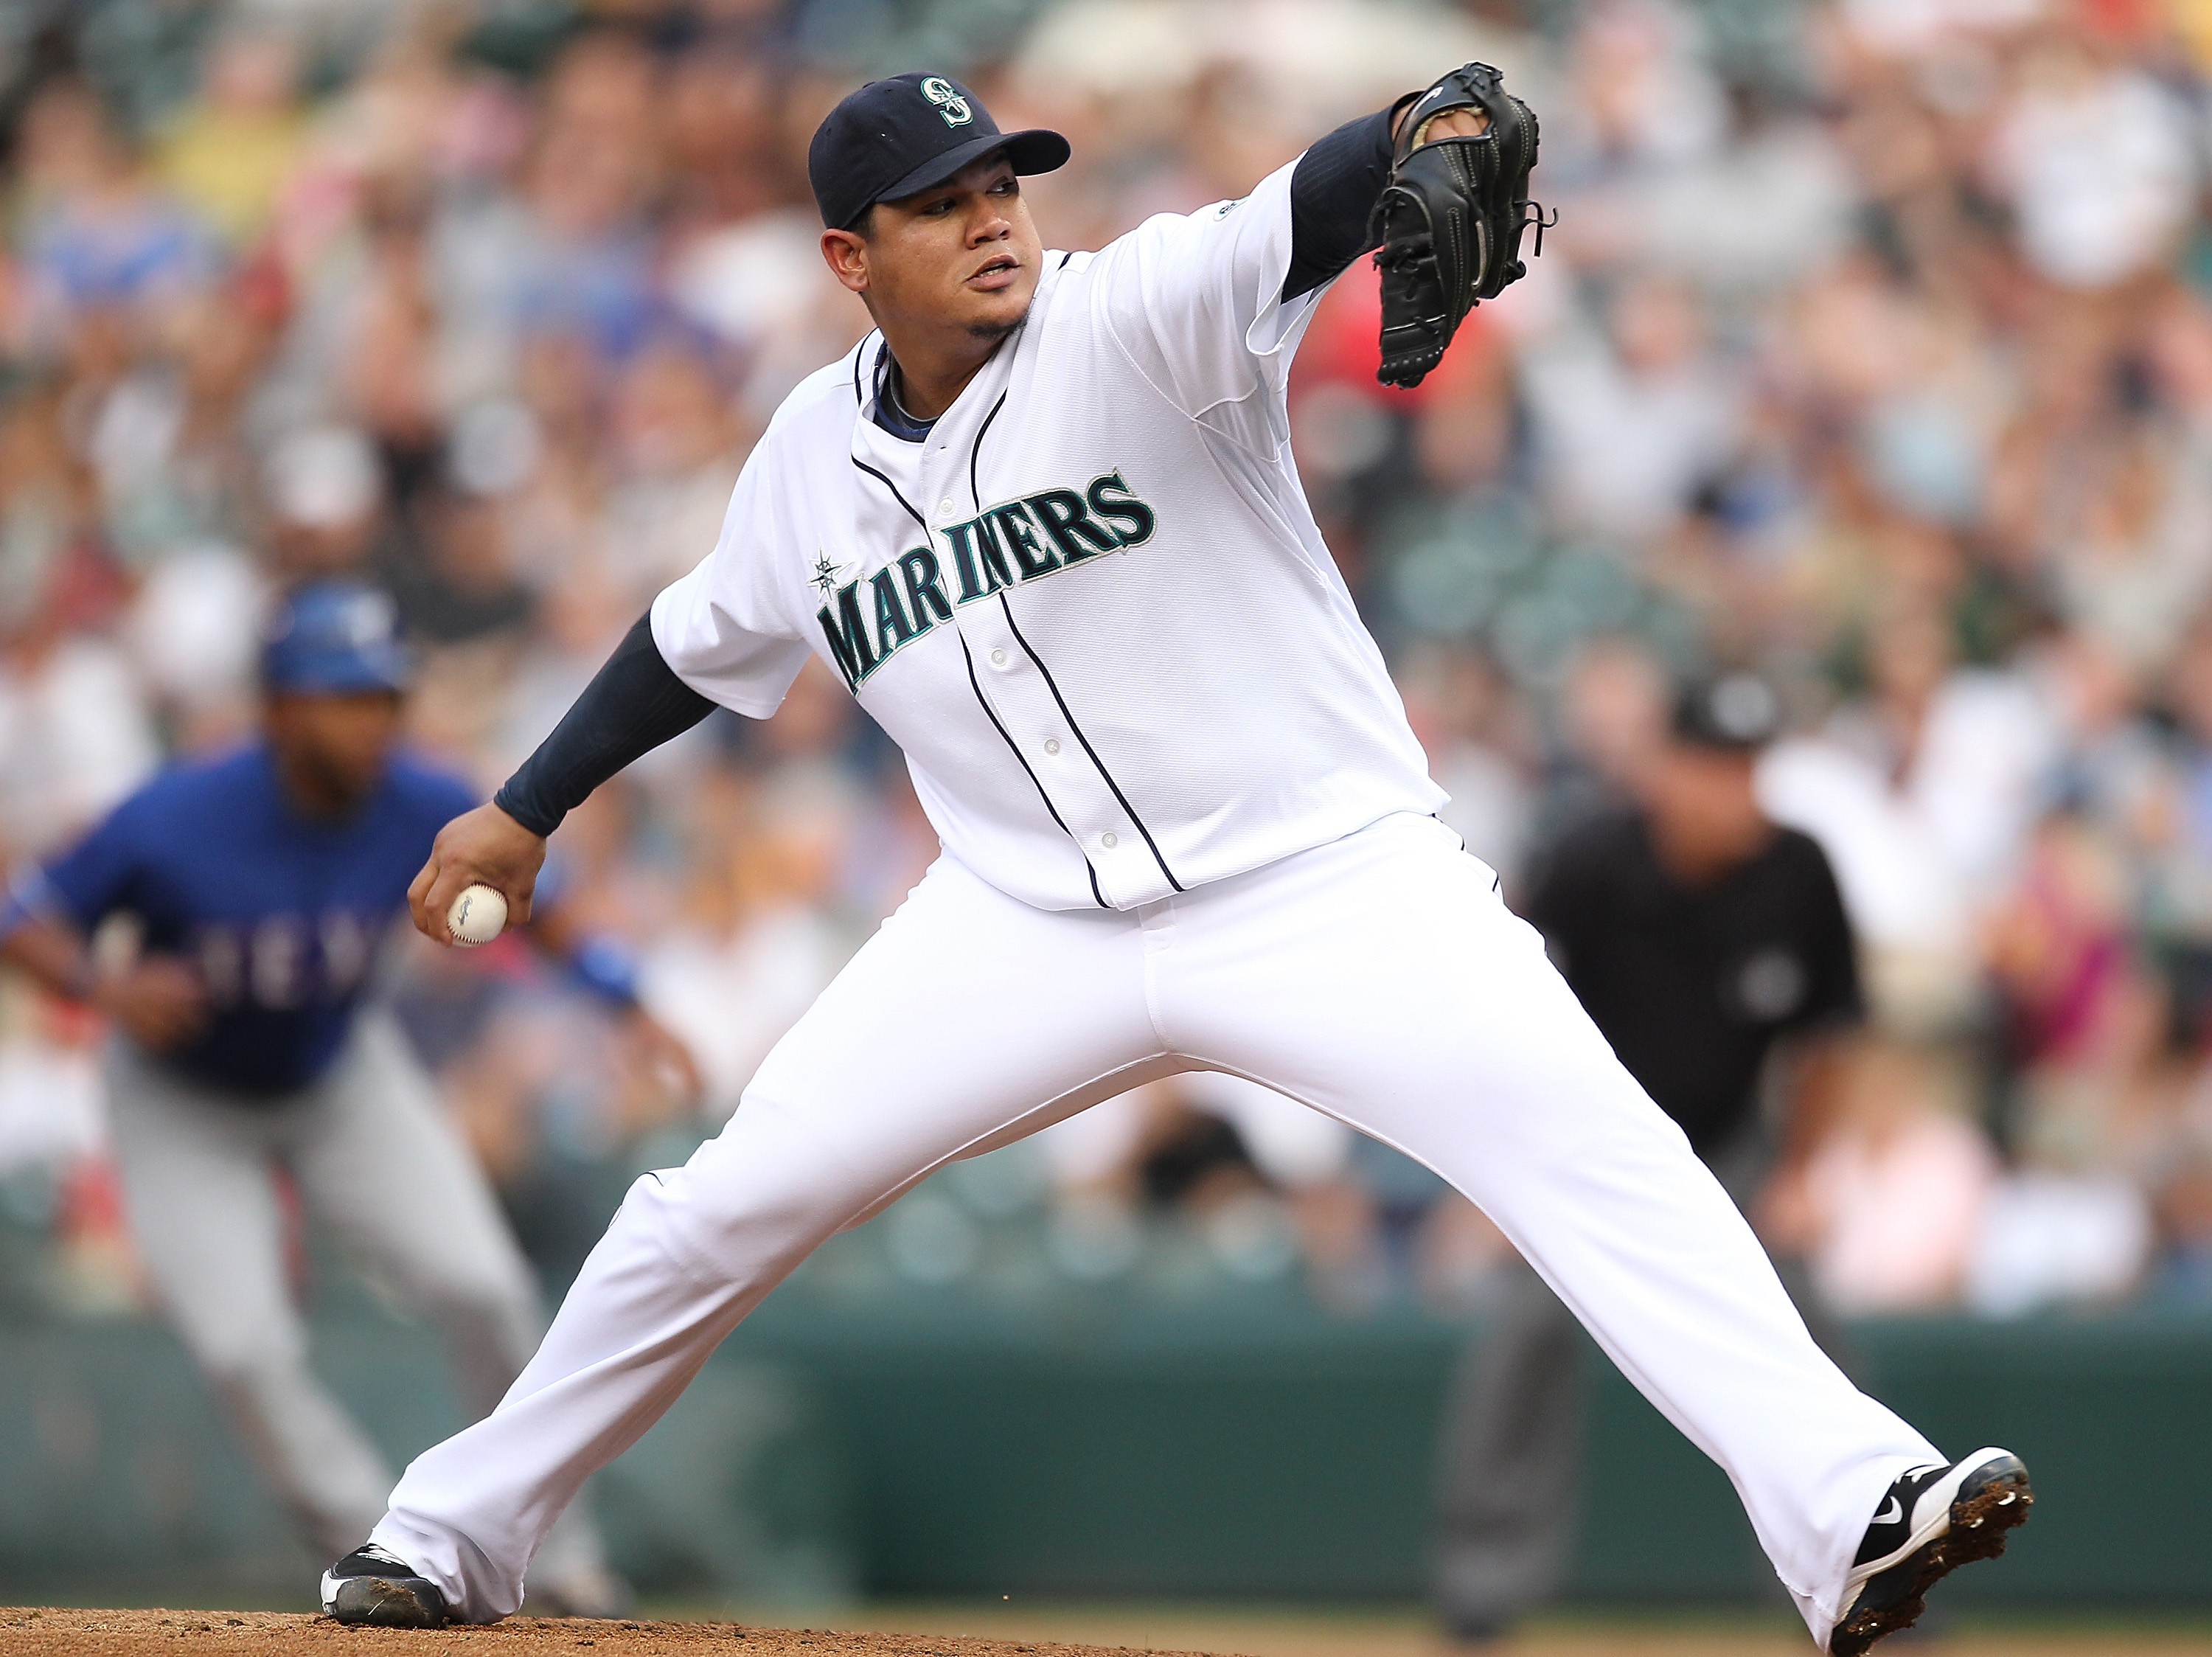 Mariners' ace Felix Hernandez on playoff drought: 'It drives me